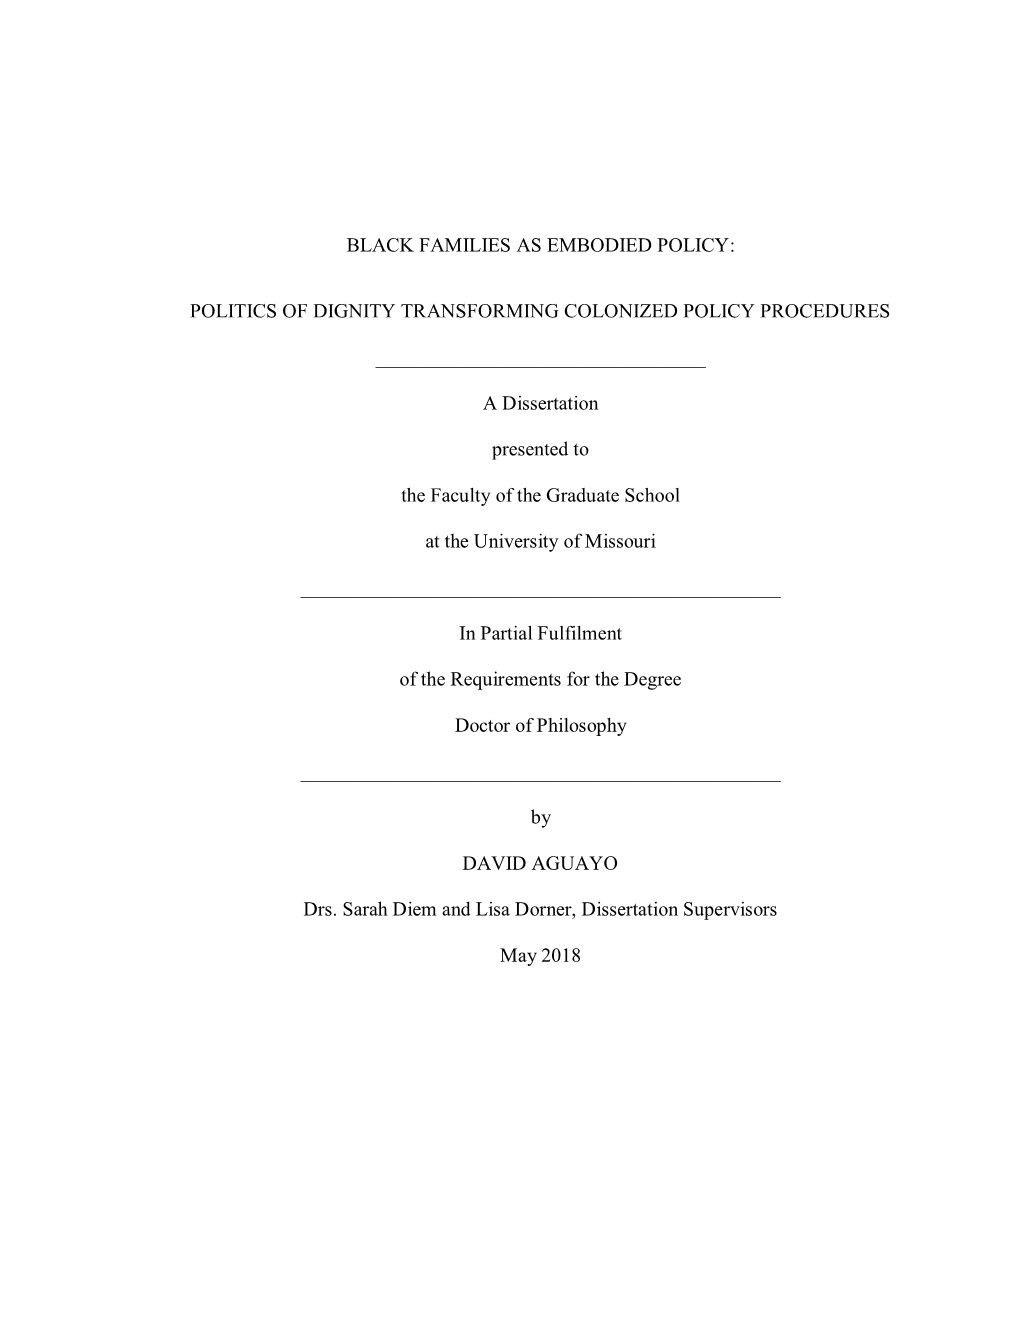 Black Families As Embodied Policy: Politics of Dignity